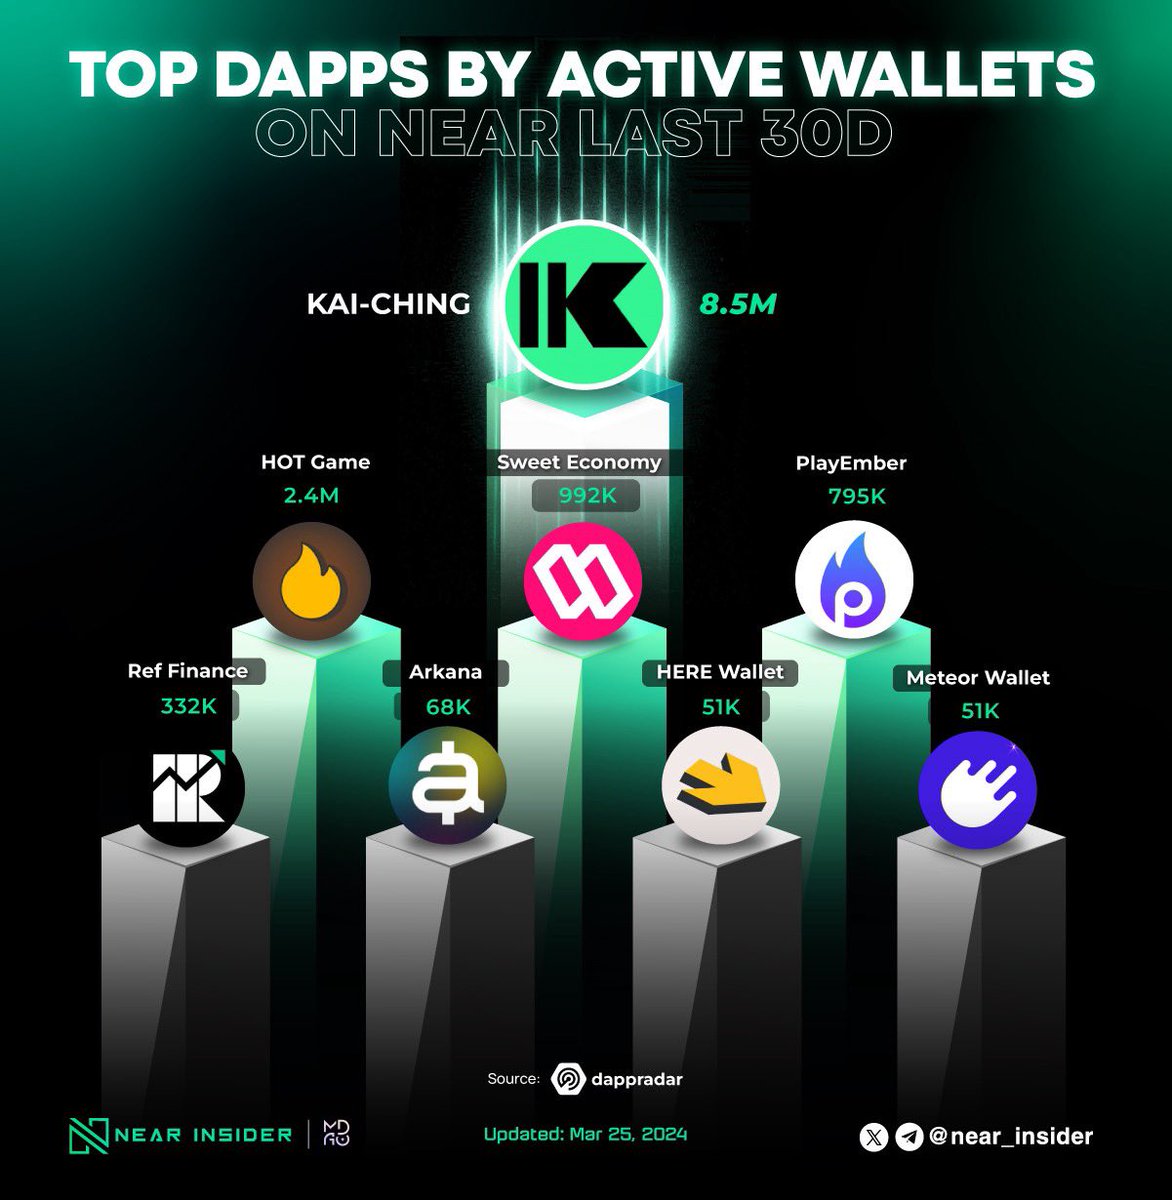 🌟 Check out the top 10 DApps on NEAR based on the number of active accounts! 🌟 Leading the pack are KAI-CHING, HOT Game and @SweatEconomy , boasting impressive user numbers 🙌: KAI-CHING: 8.5M HOT Game: 2.4M Sweat Economy: 992K @play_ember @finance_ref @here_wallet @ArkanaHQ…